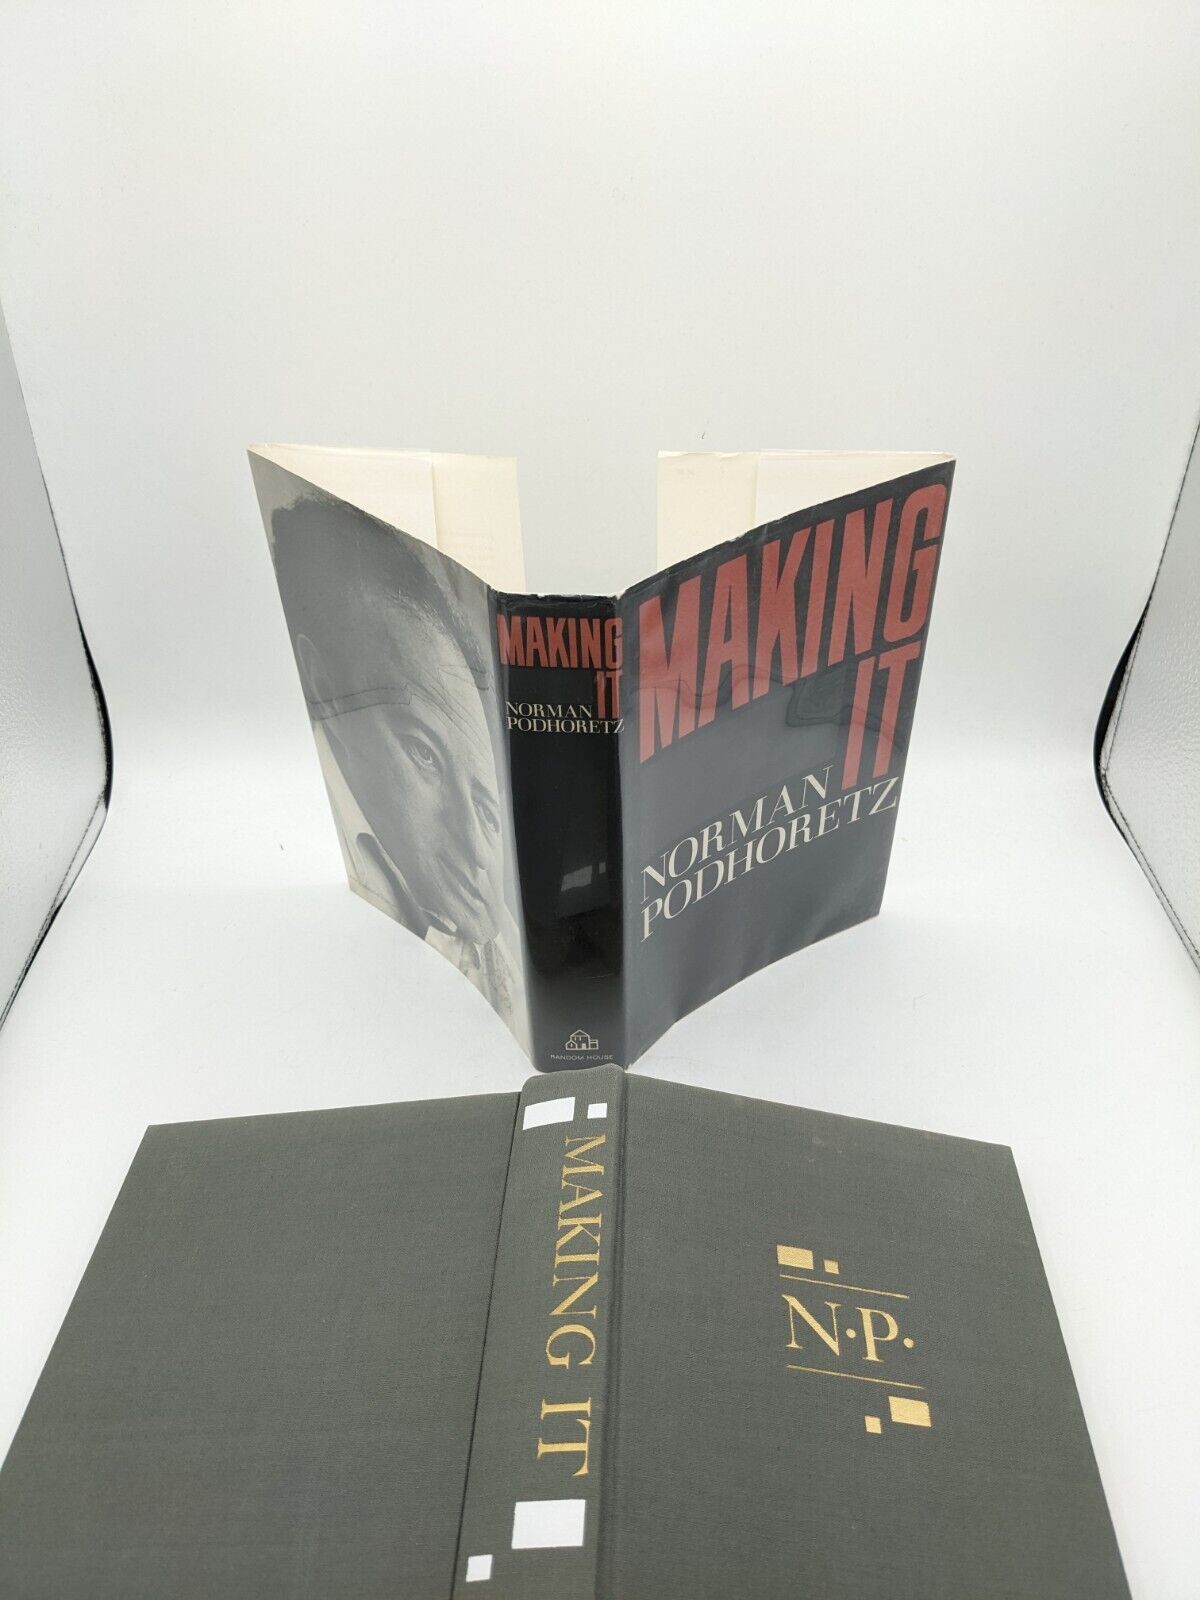 Book making it by norman podhoretz first edition printing hardcover dj